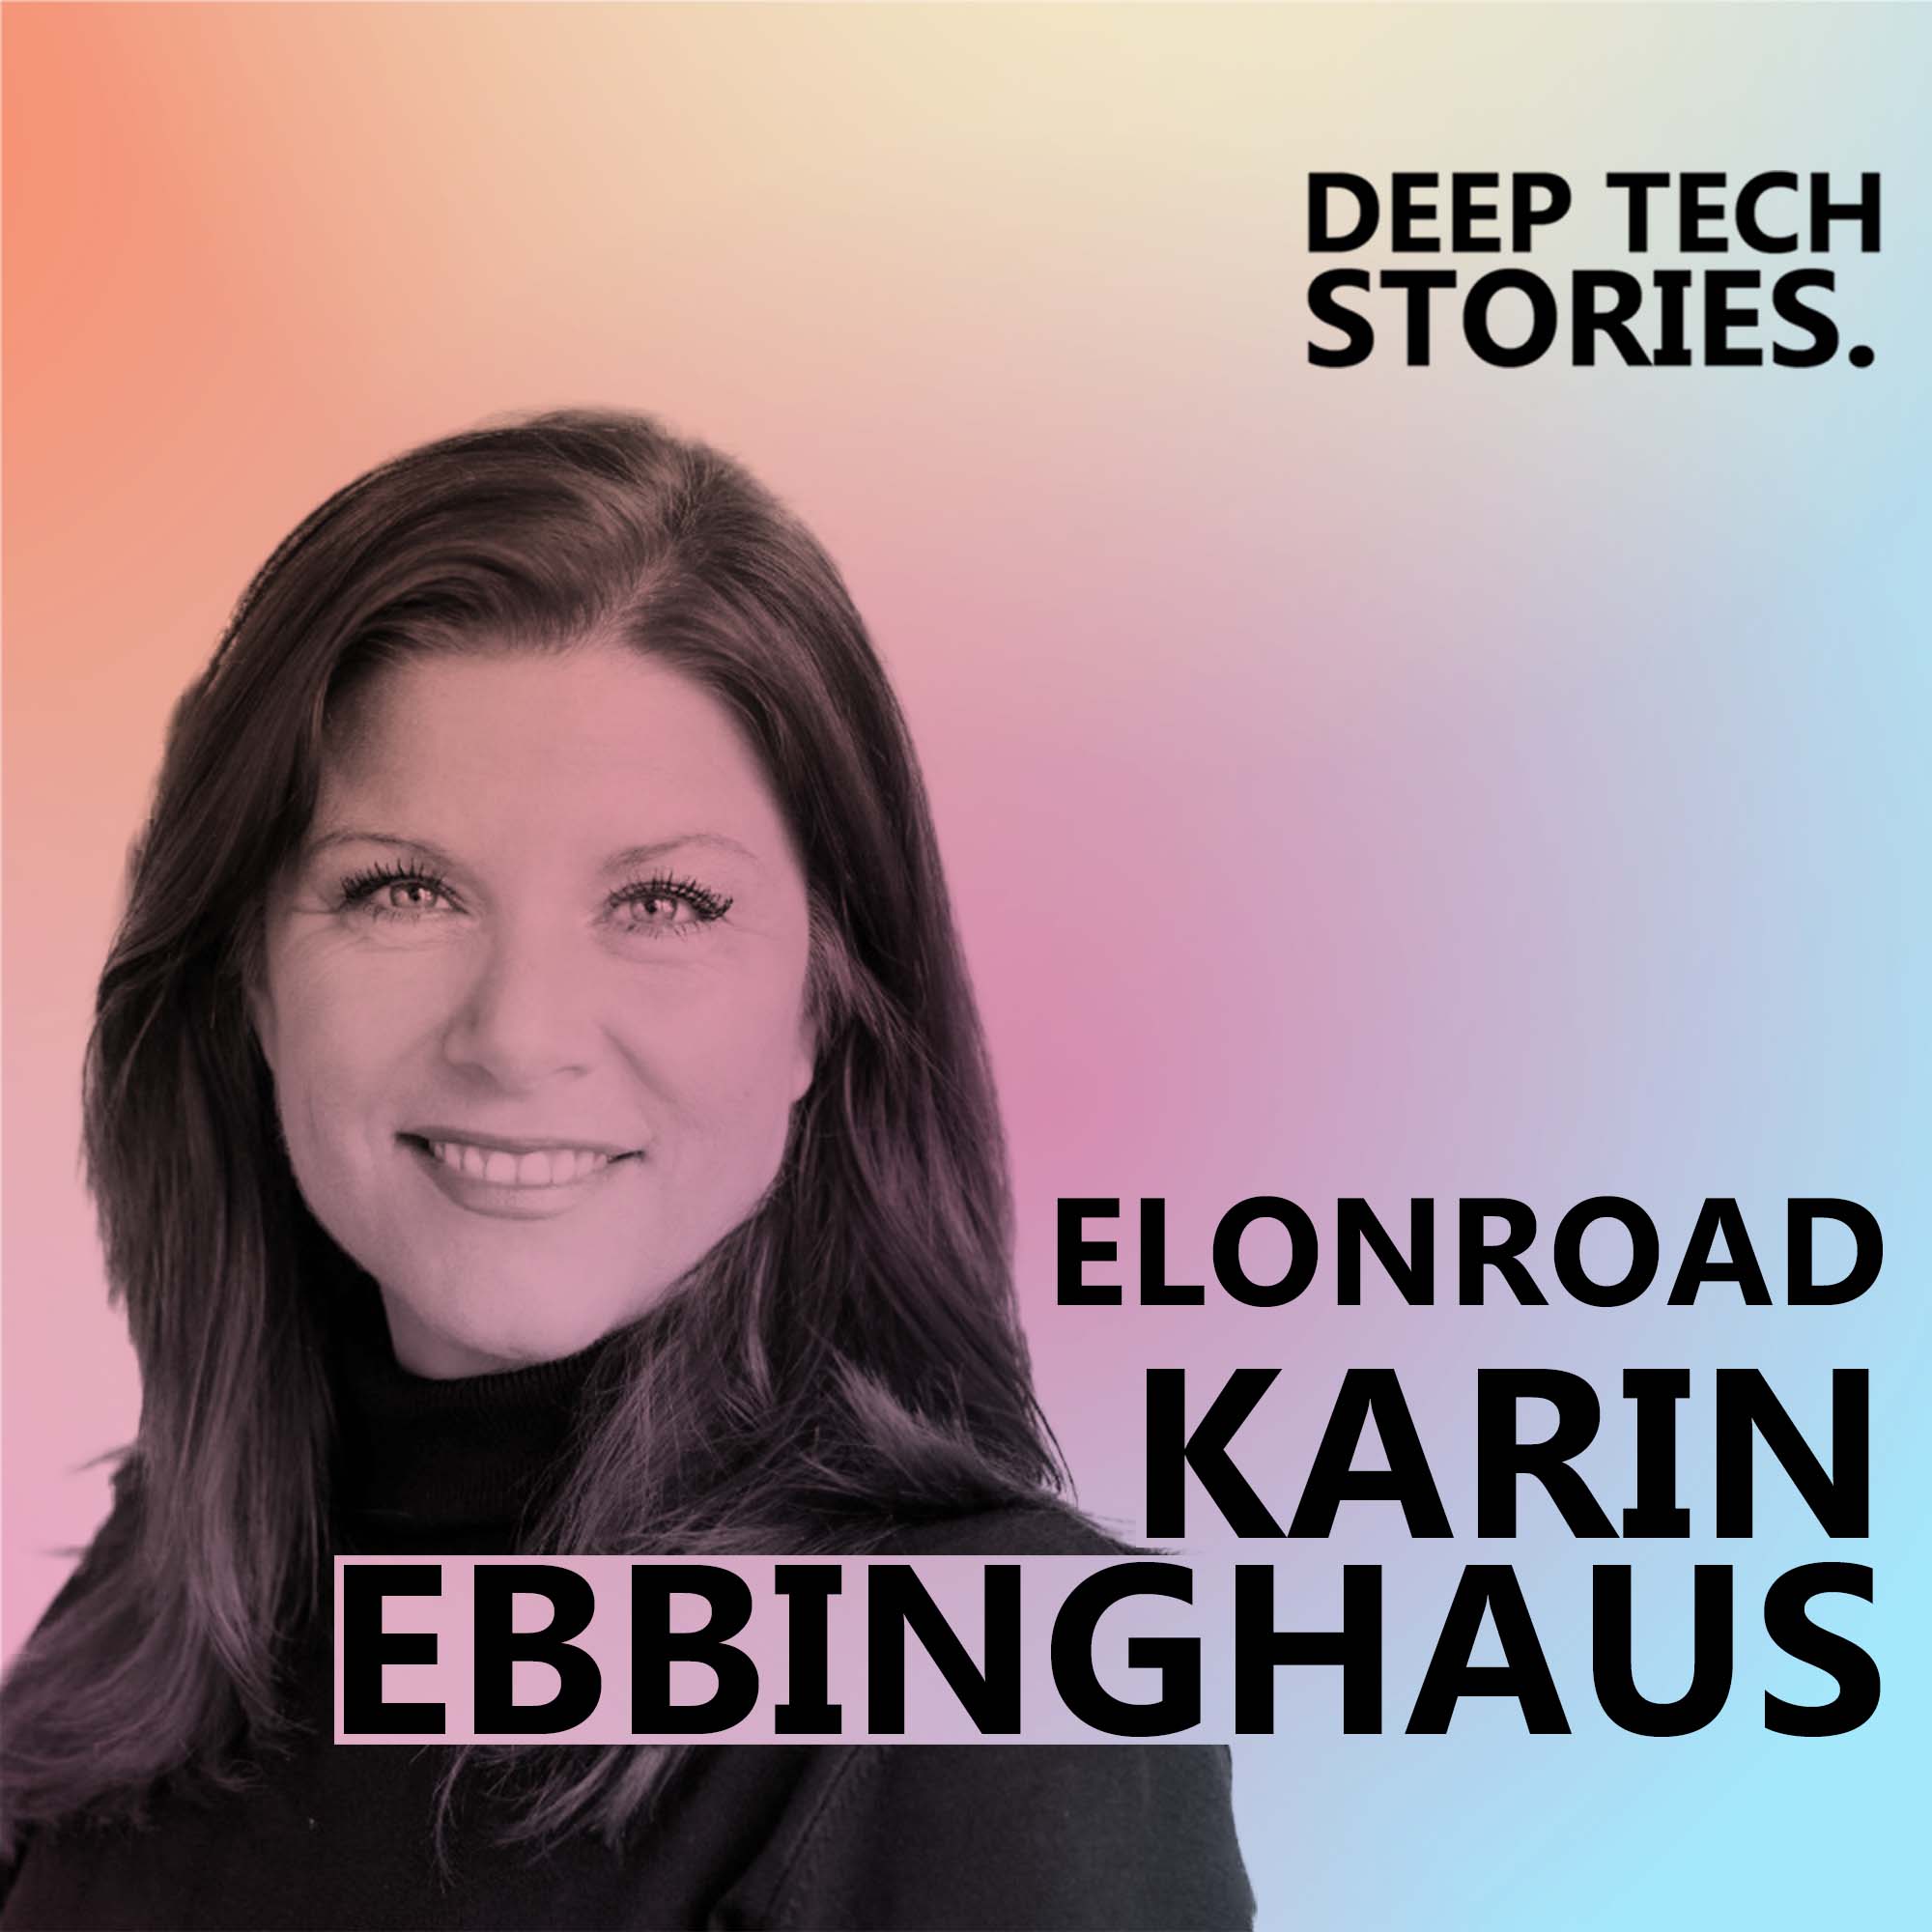 Elonroad CEO Karin Ebbinghaus: Building electric roads and boosting electric cars' range Image